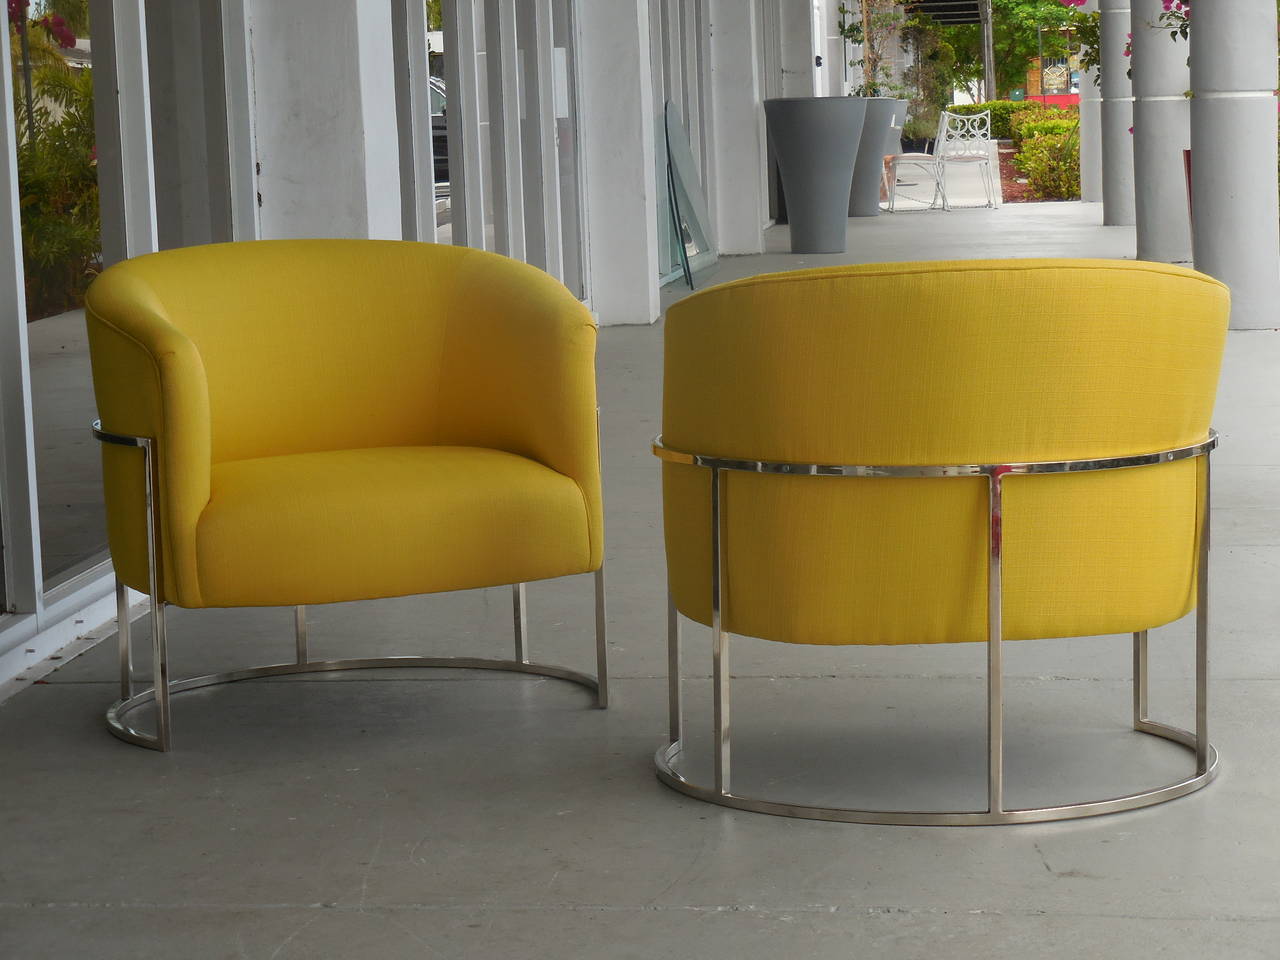 A pair of beautiful chairs by Milo Baughman. Round metal bases with floating tub seats. Simple design with wonderful proportions. Super comfortable.